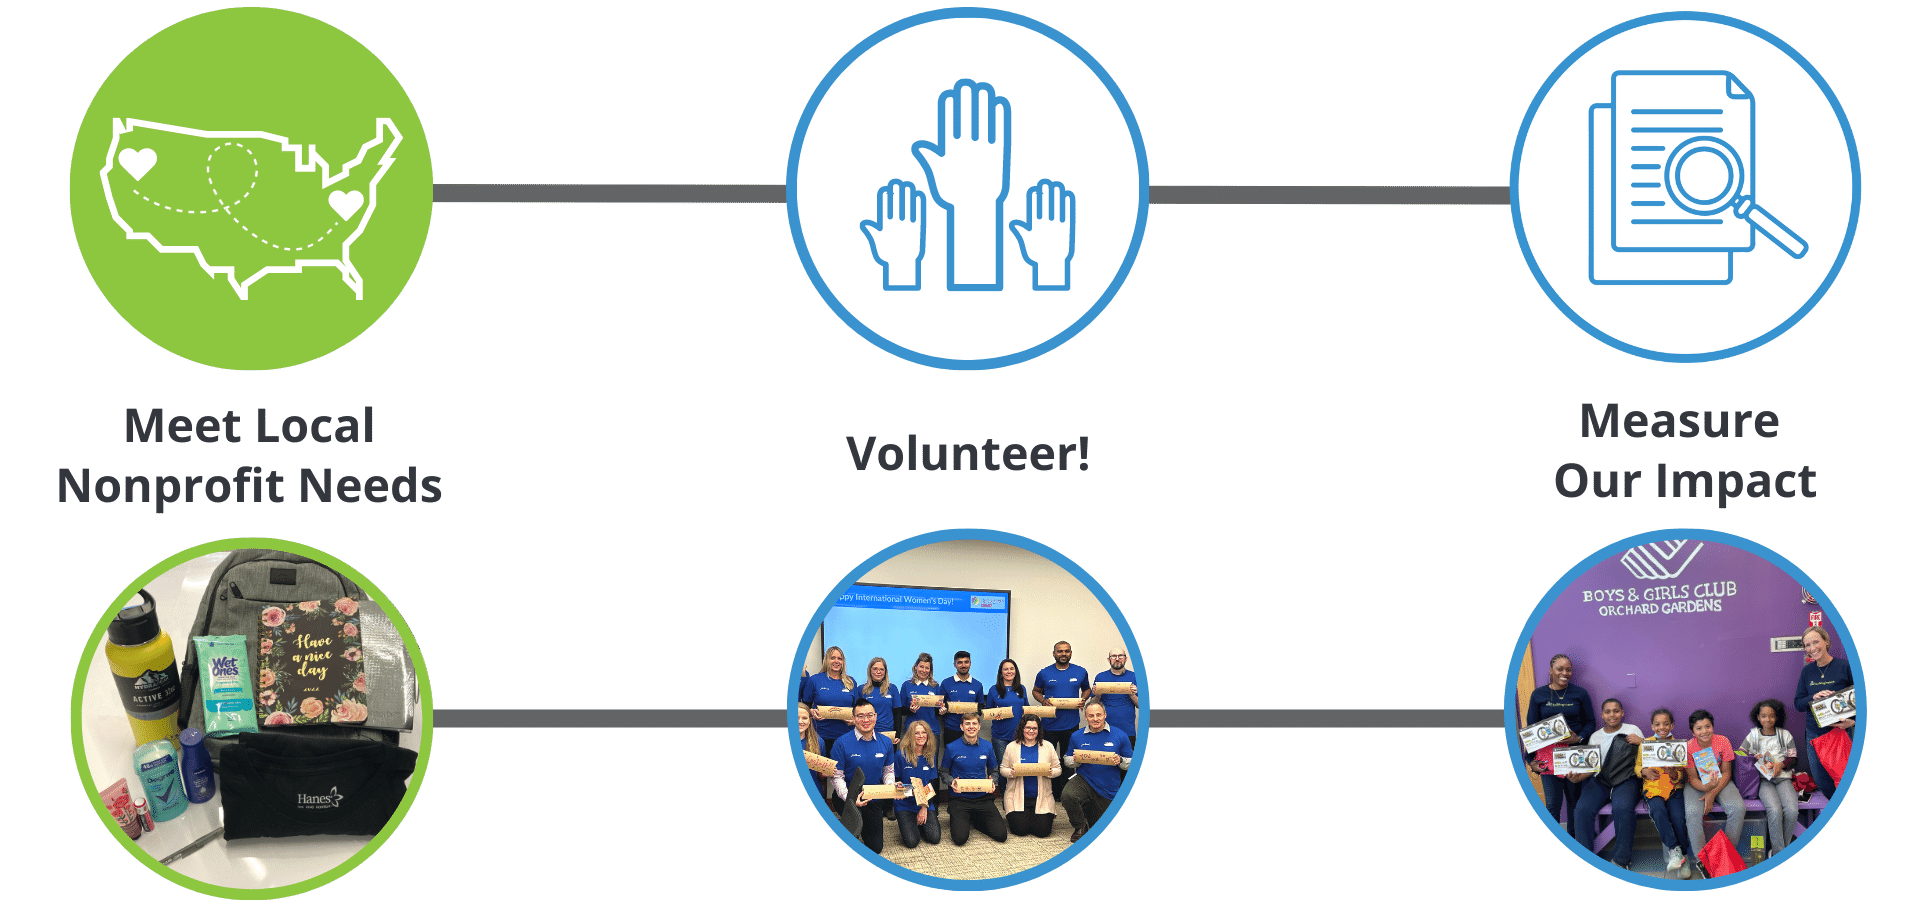 Stepper showing how the volunteer process works. Building Impact designs the project to meet nonprofit needs, brings teams together to volunteer, and measures our impact.